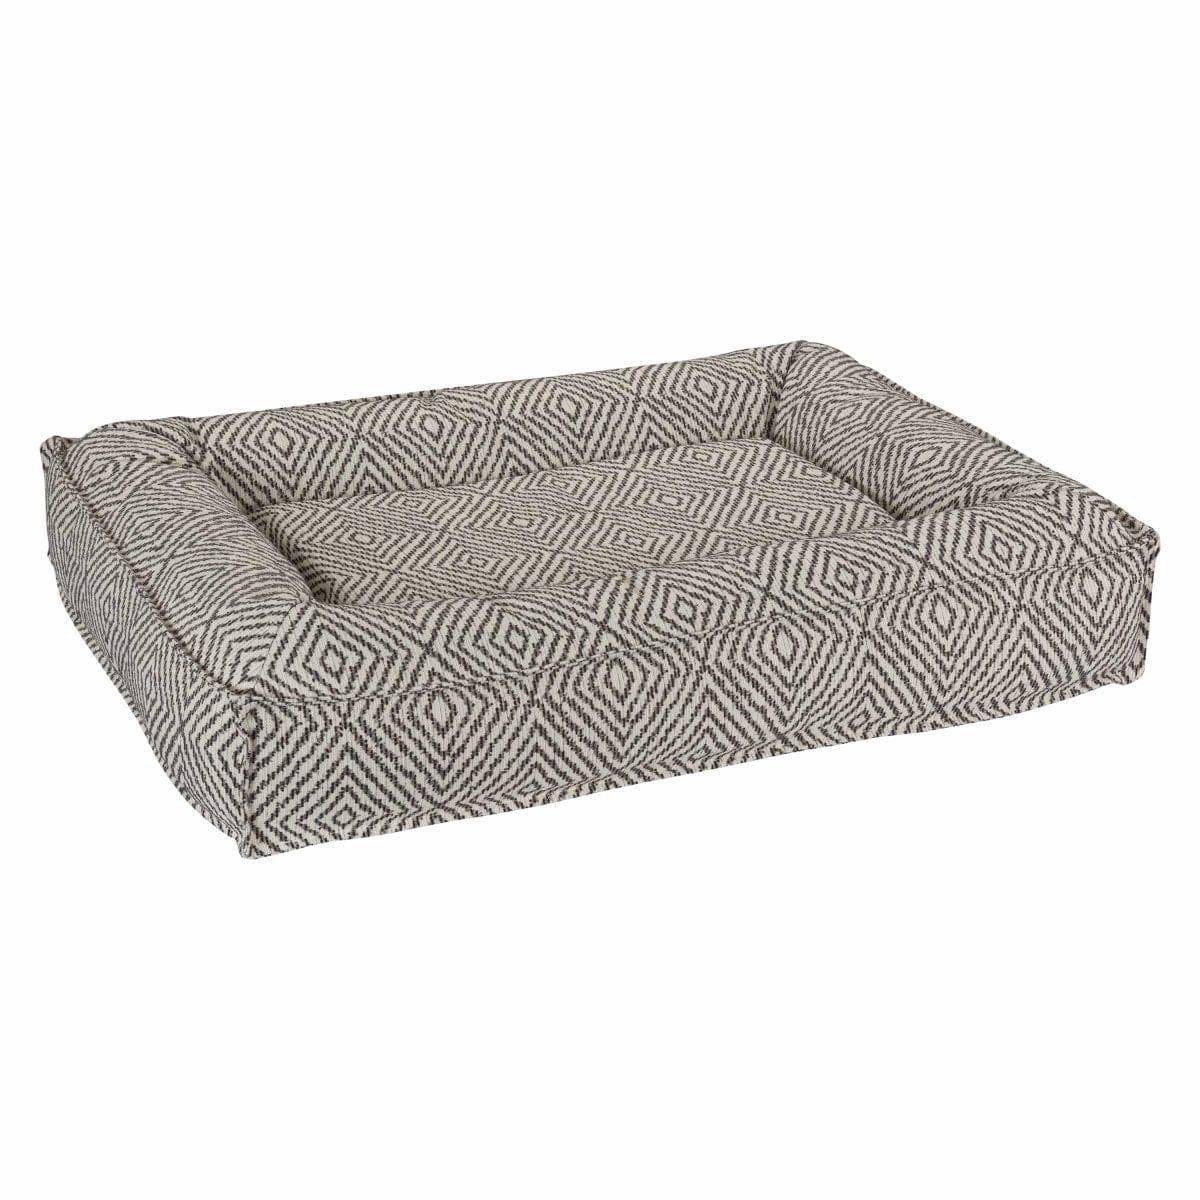 Bowsers Divine Futon Dog Bed - OmniaPaws